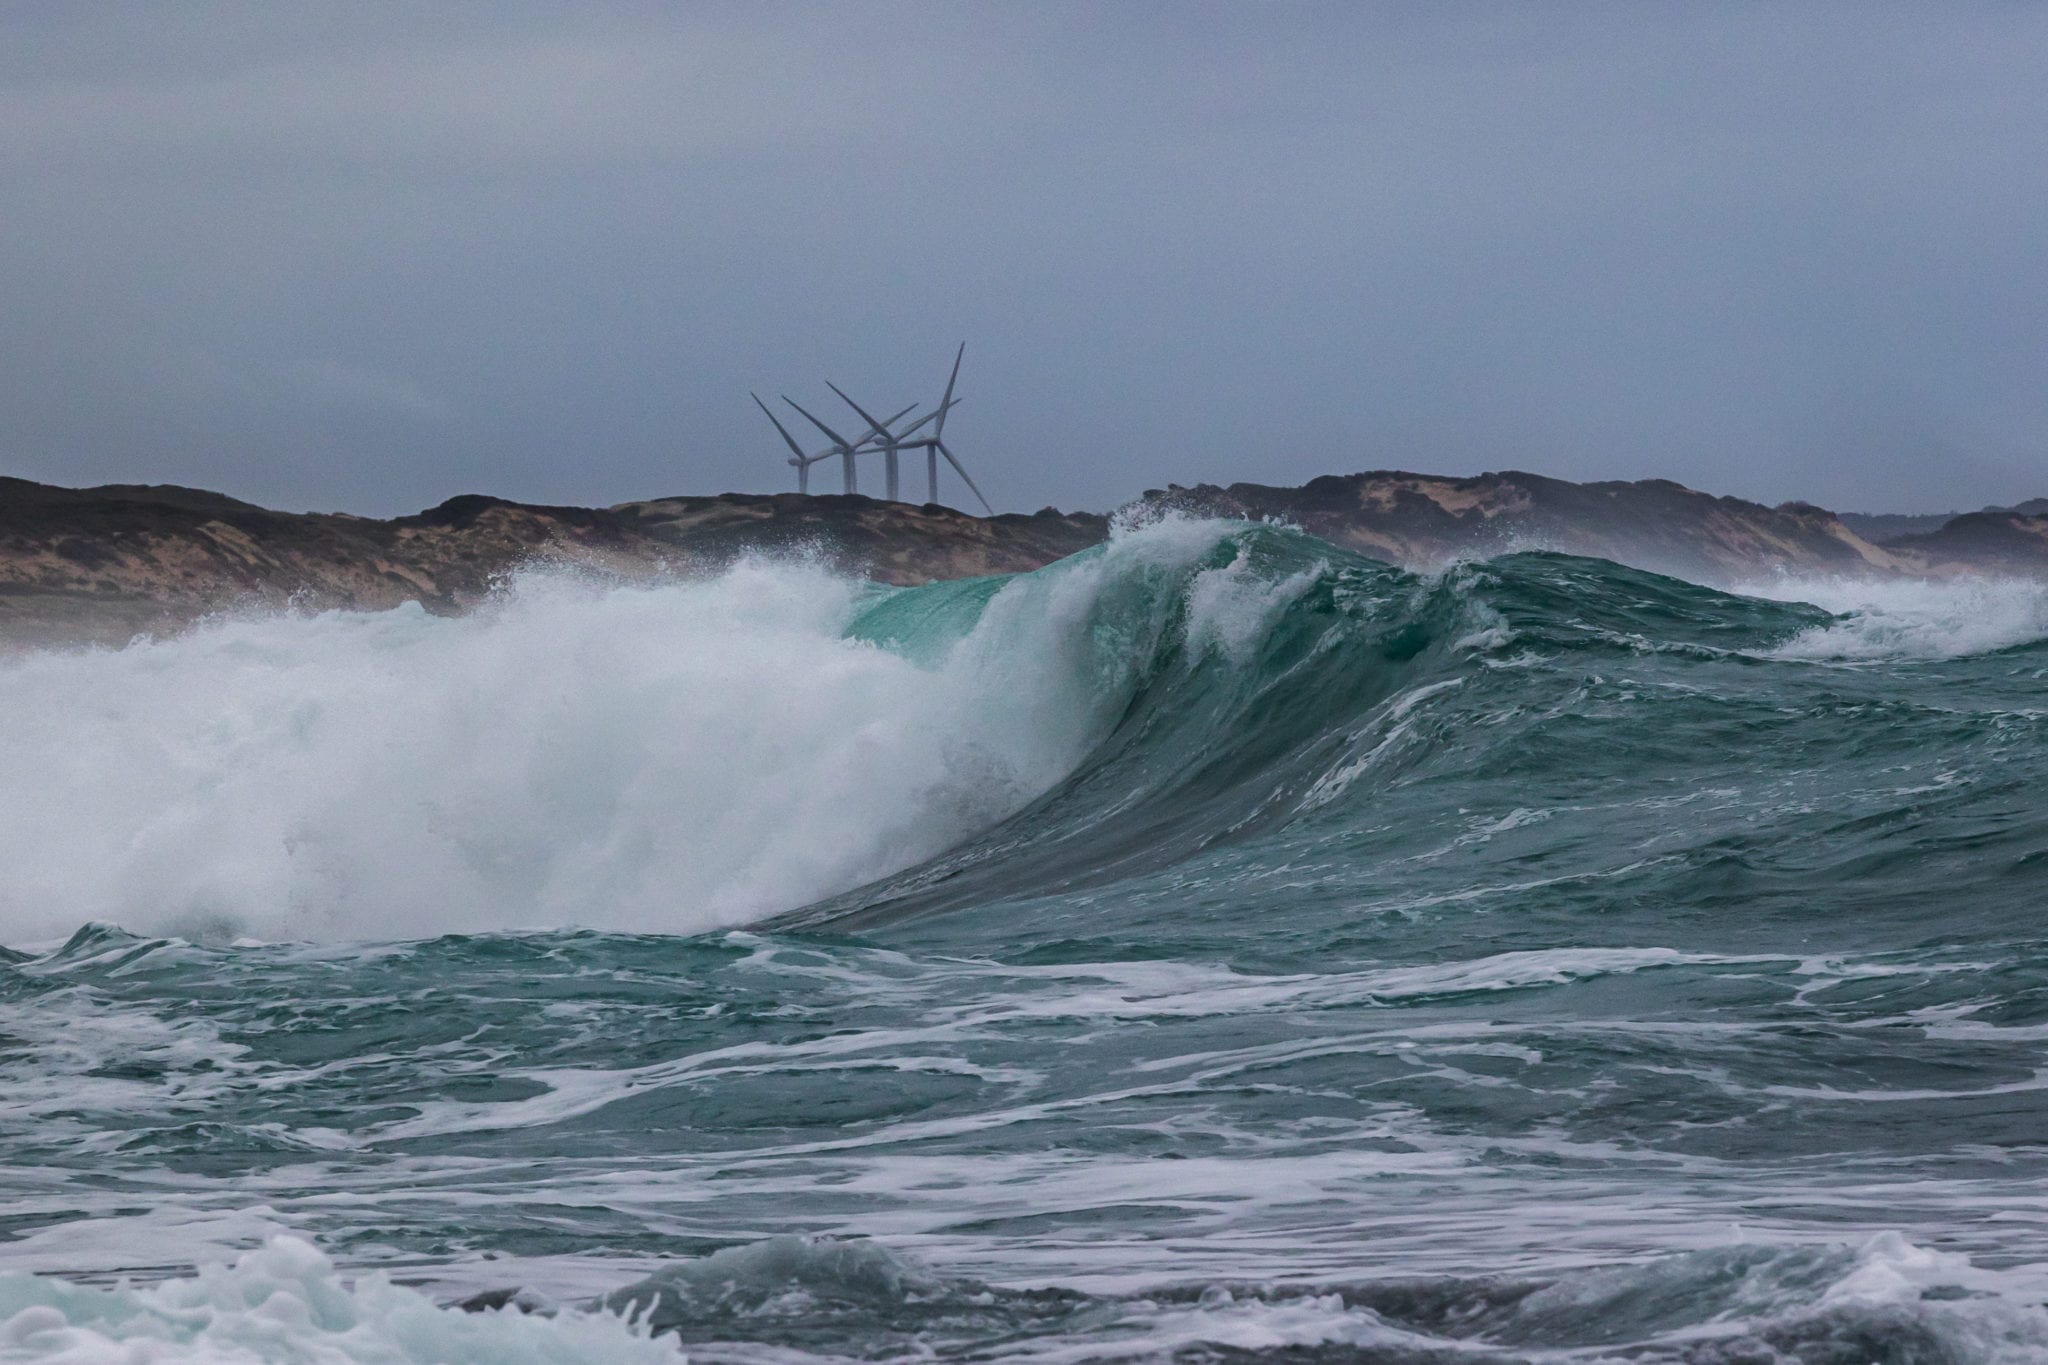 Power of the wind and sea at Kilcunda | darrenchester.com.au